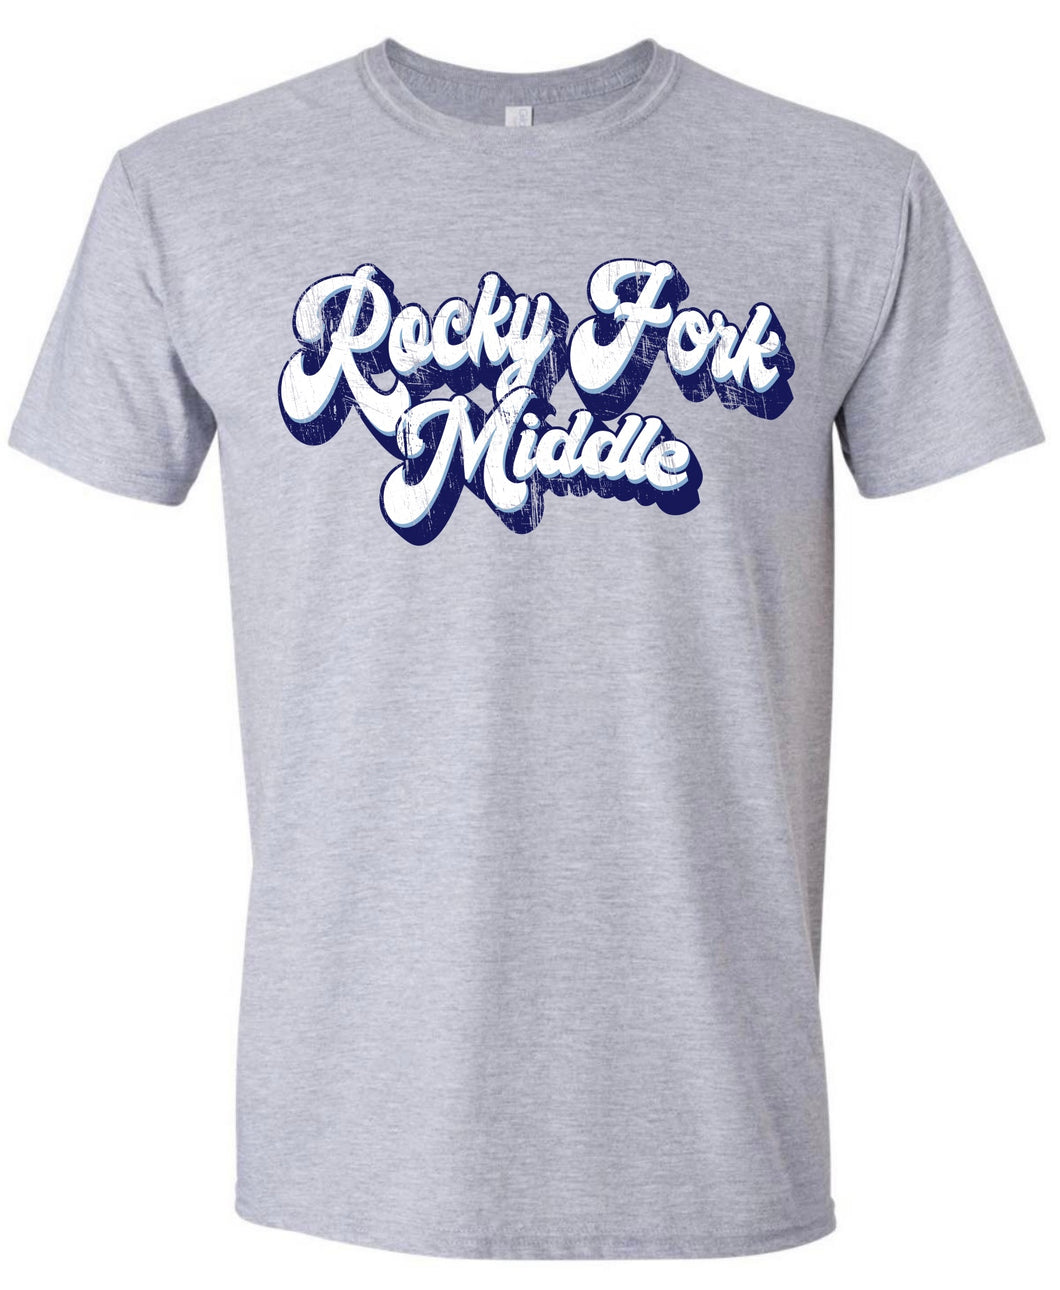 Rocky Fork Middle Distressed Retro Tshirt